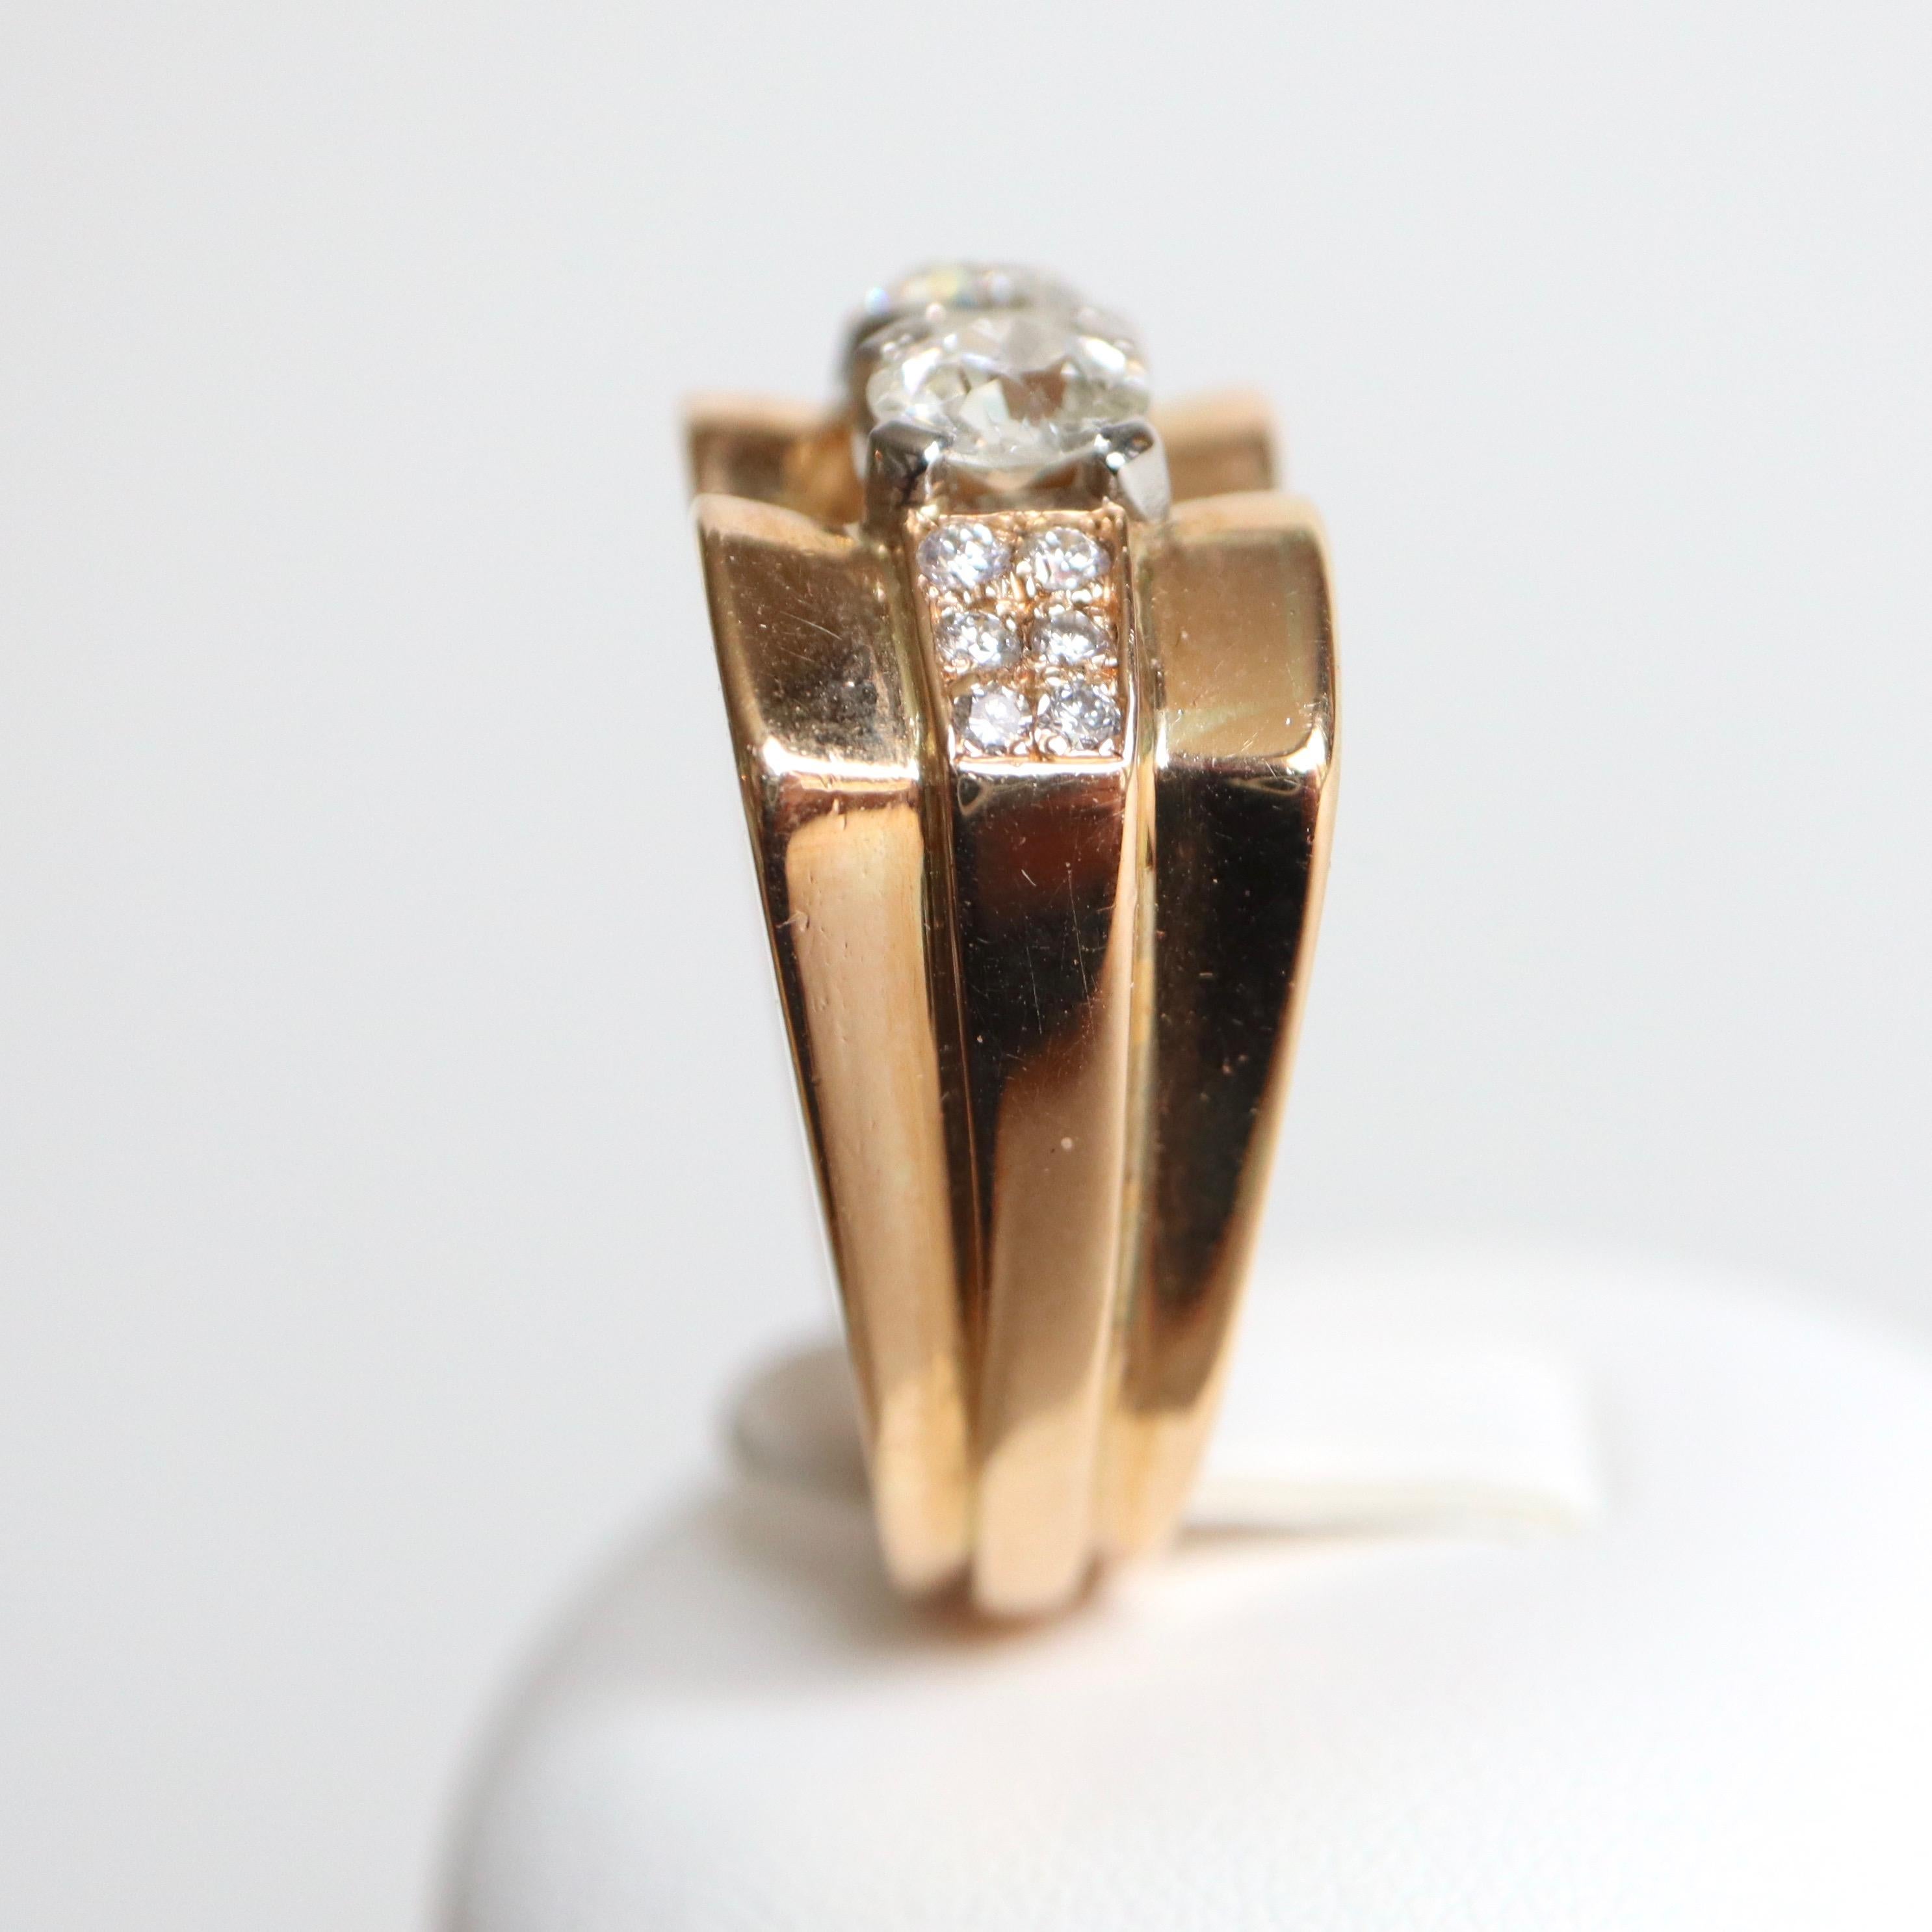 1940 Signet Ring in 18 Carat yellow Gold Tank Model, setting two main Diamonds of approximately 0.5 Carats each and a paving of 6 small Diamonds on each Side for approximately 0.2 Carats
Gross Weight: 14.3 g Diameter: 17 Size 53, US Size 6.5 Width